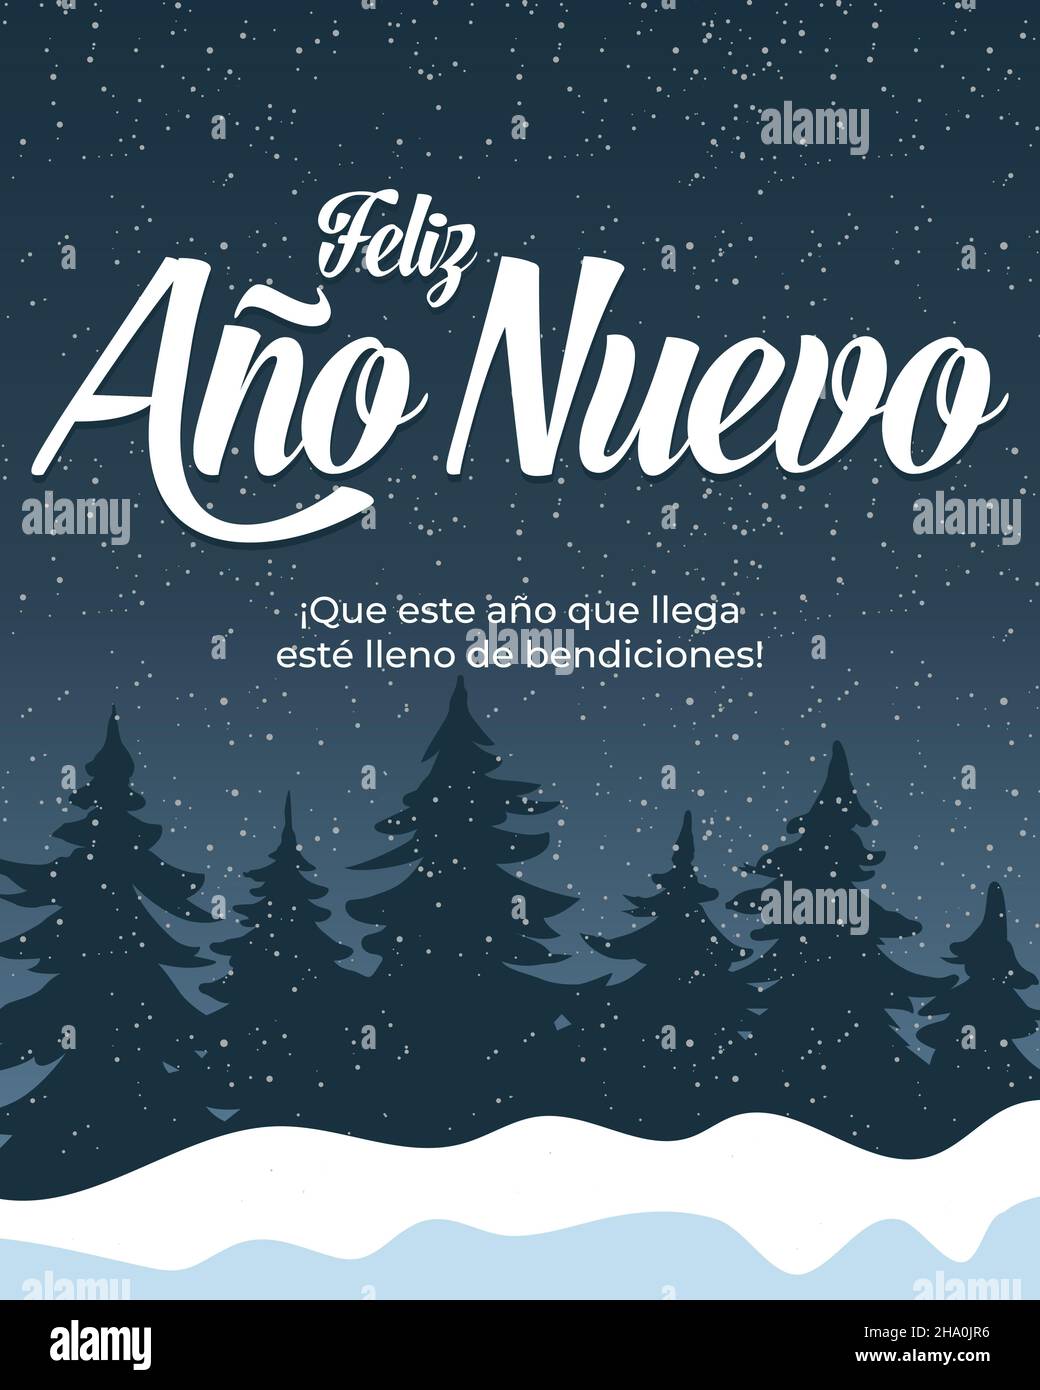 Spanish New Year Greeting Card With Happy New Year And May This Coming Year Be Full Of Blessings Message Stock Vector Image Art Alamy